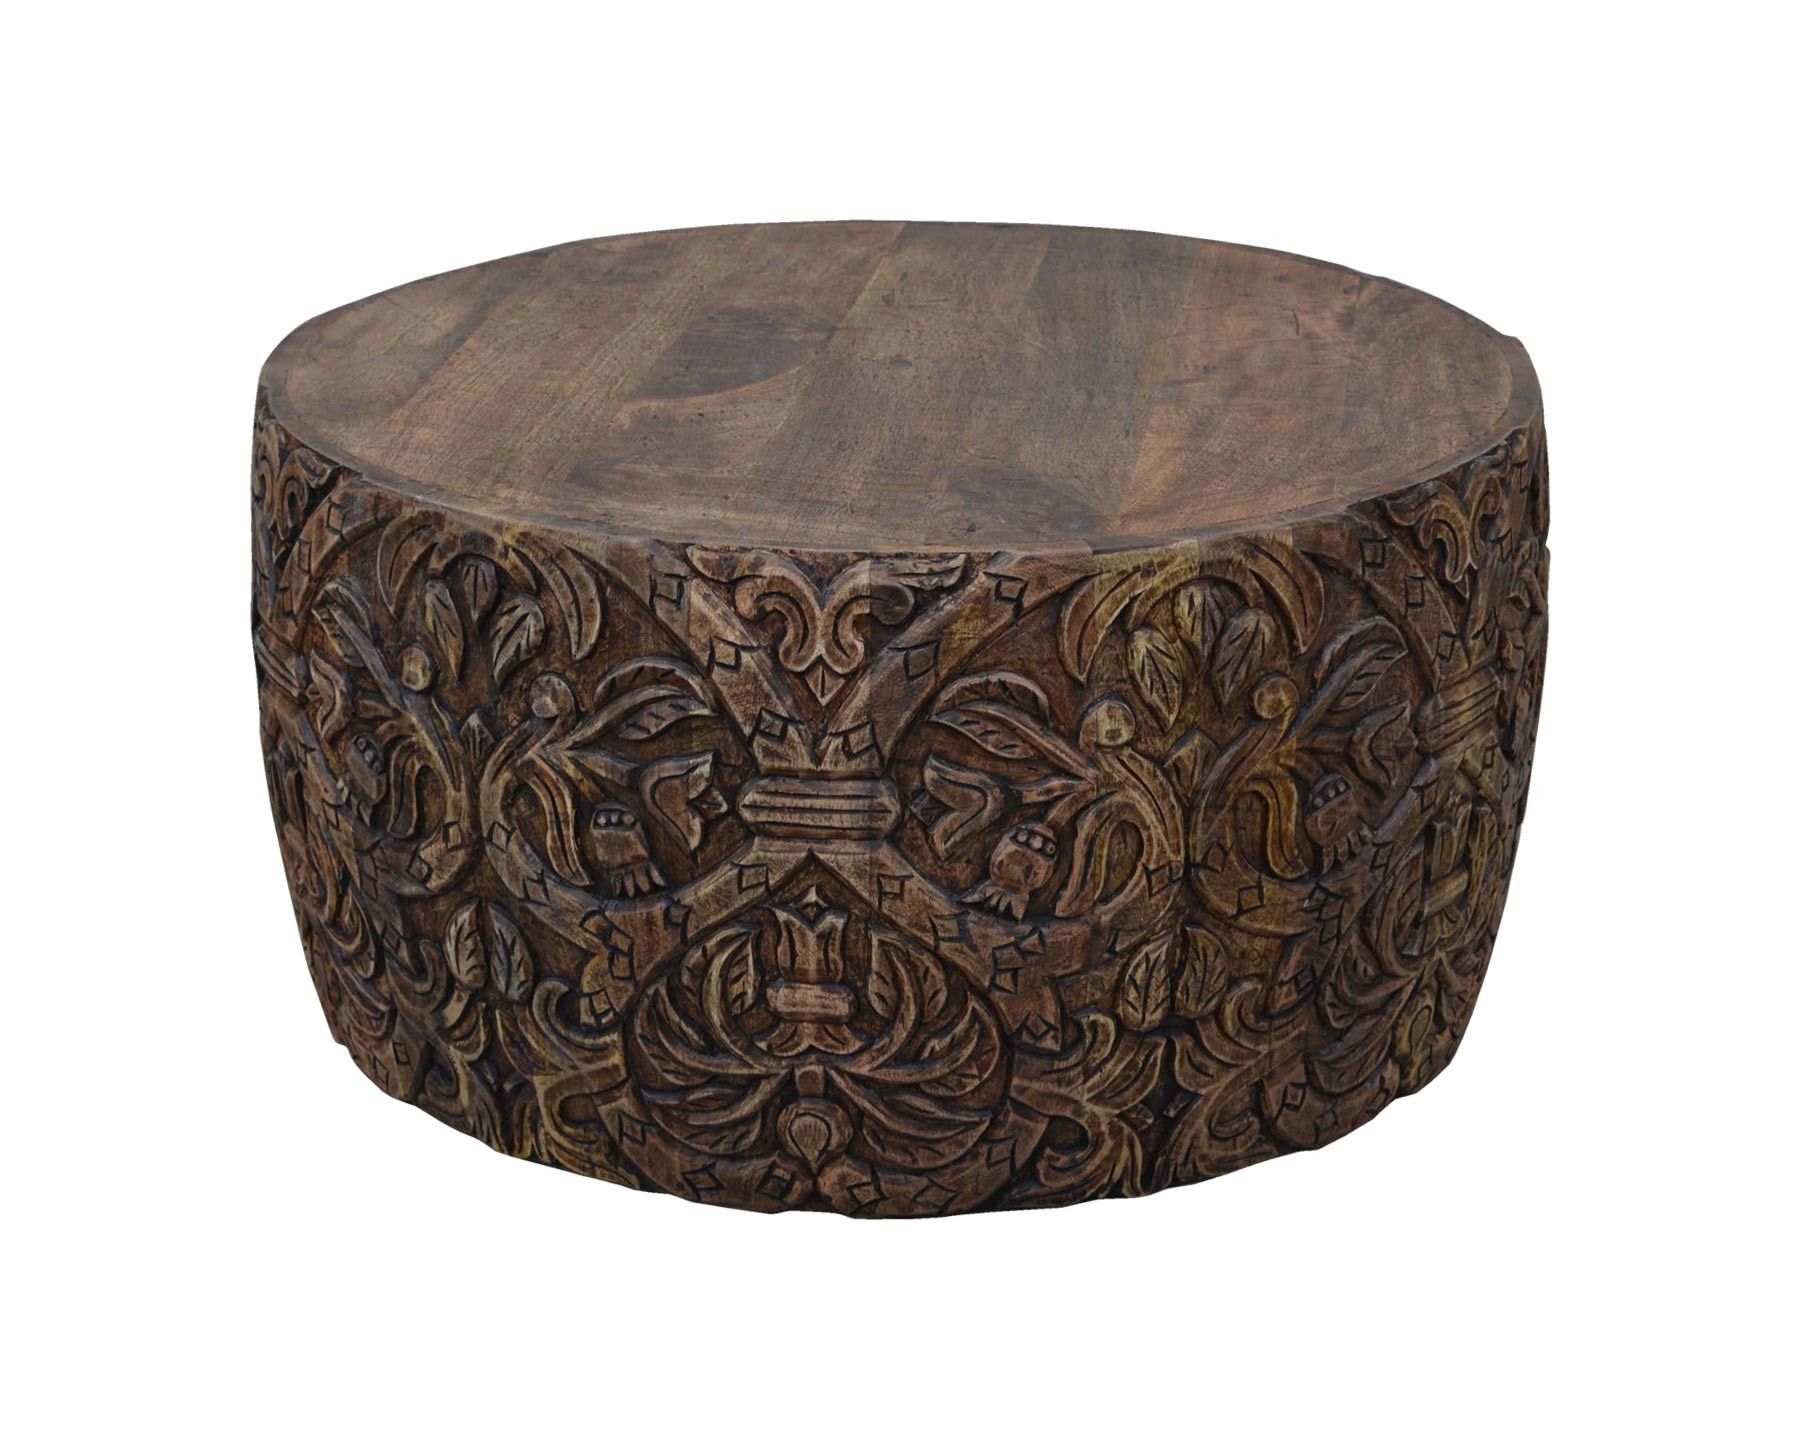 30 Best Collection of Round Carved Wood Coffee Tables